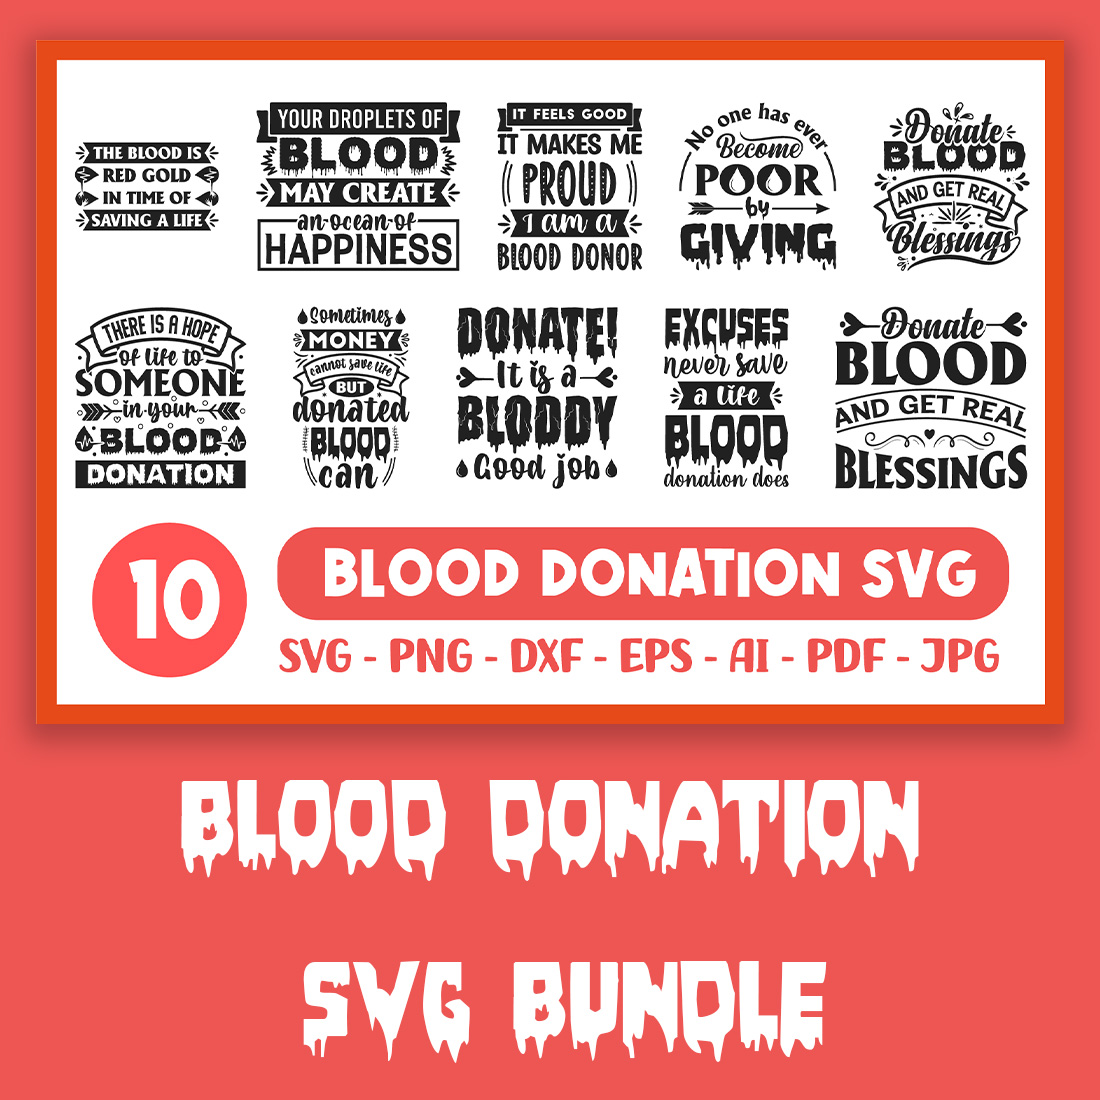 A pack of beautiful images for prints on the theme of blood donation